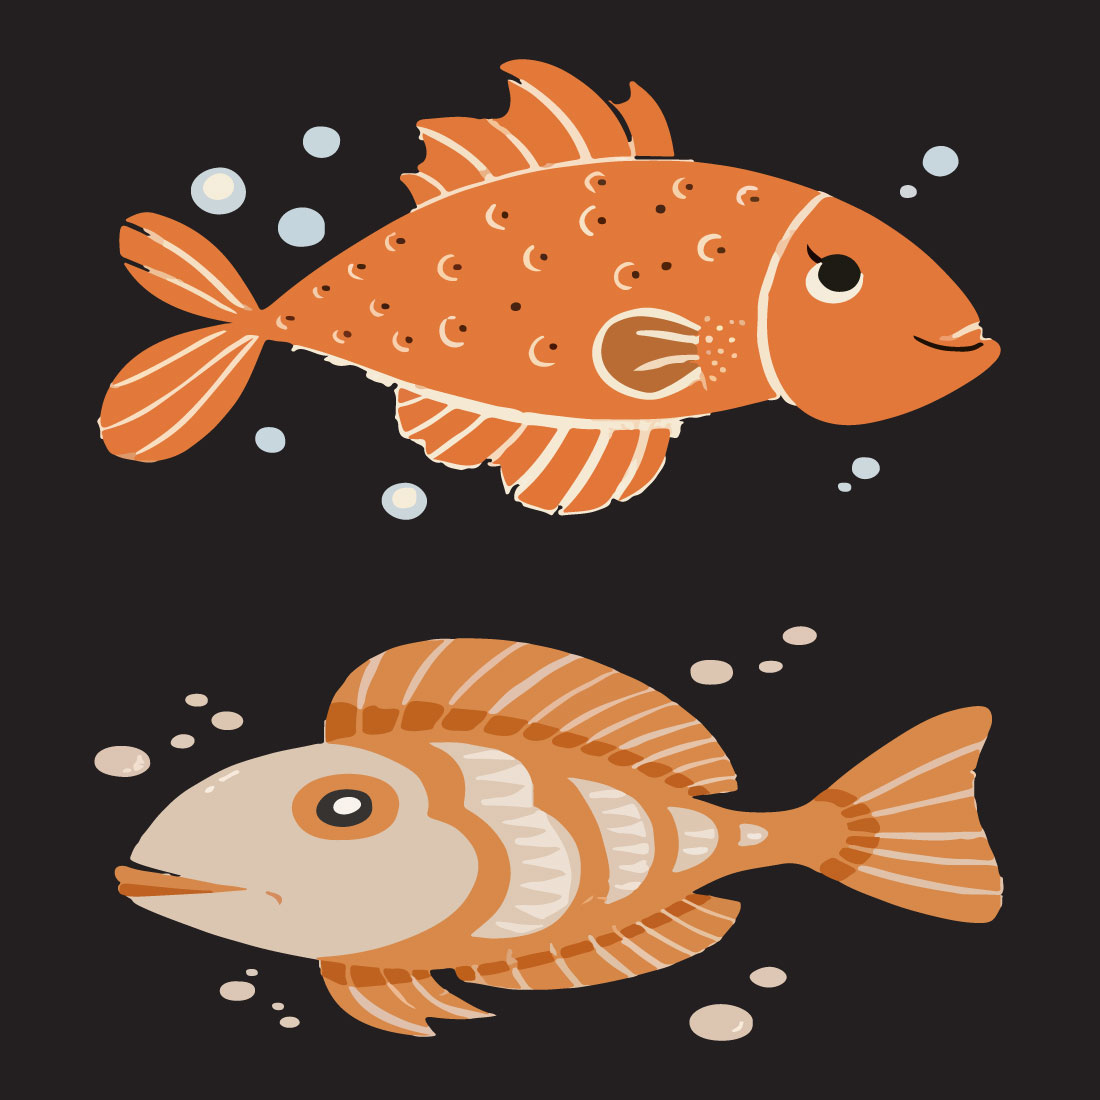 Fish vector design, move it any where preview image.